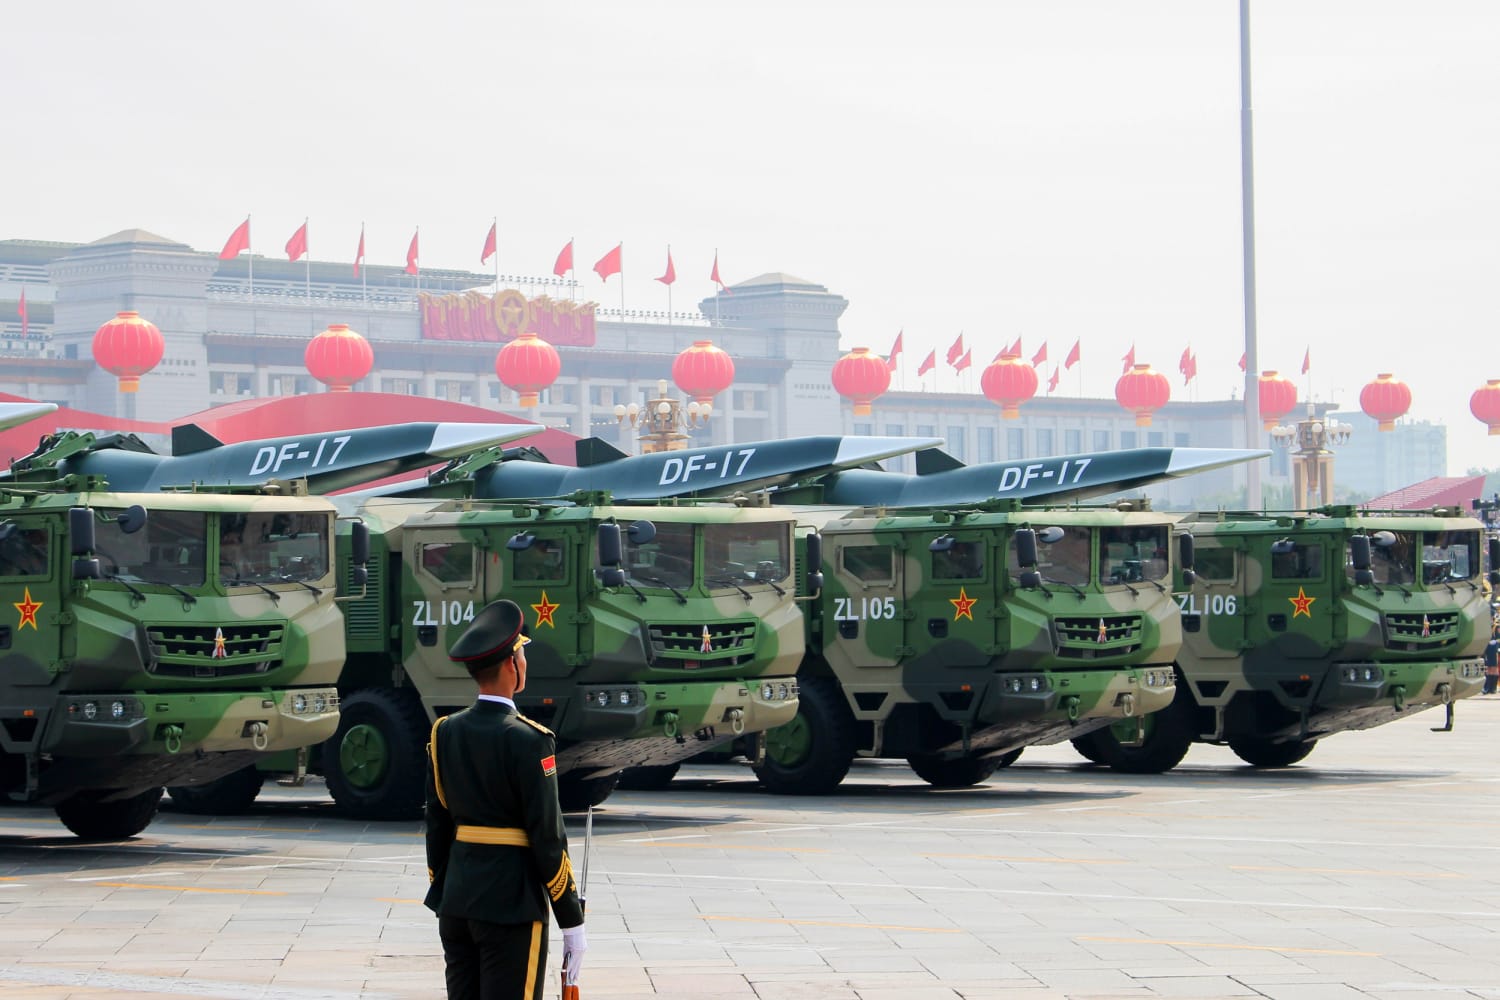 Why China is building its nuclear arsenal — and how the U.S. should respond